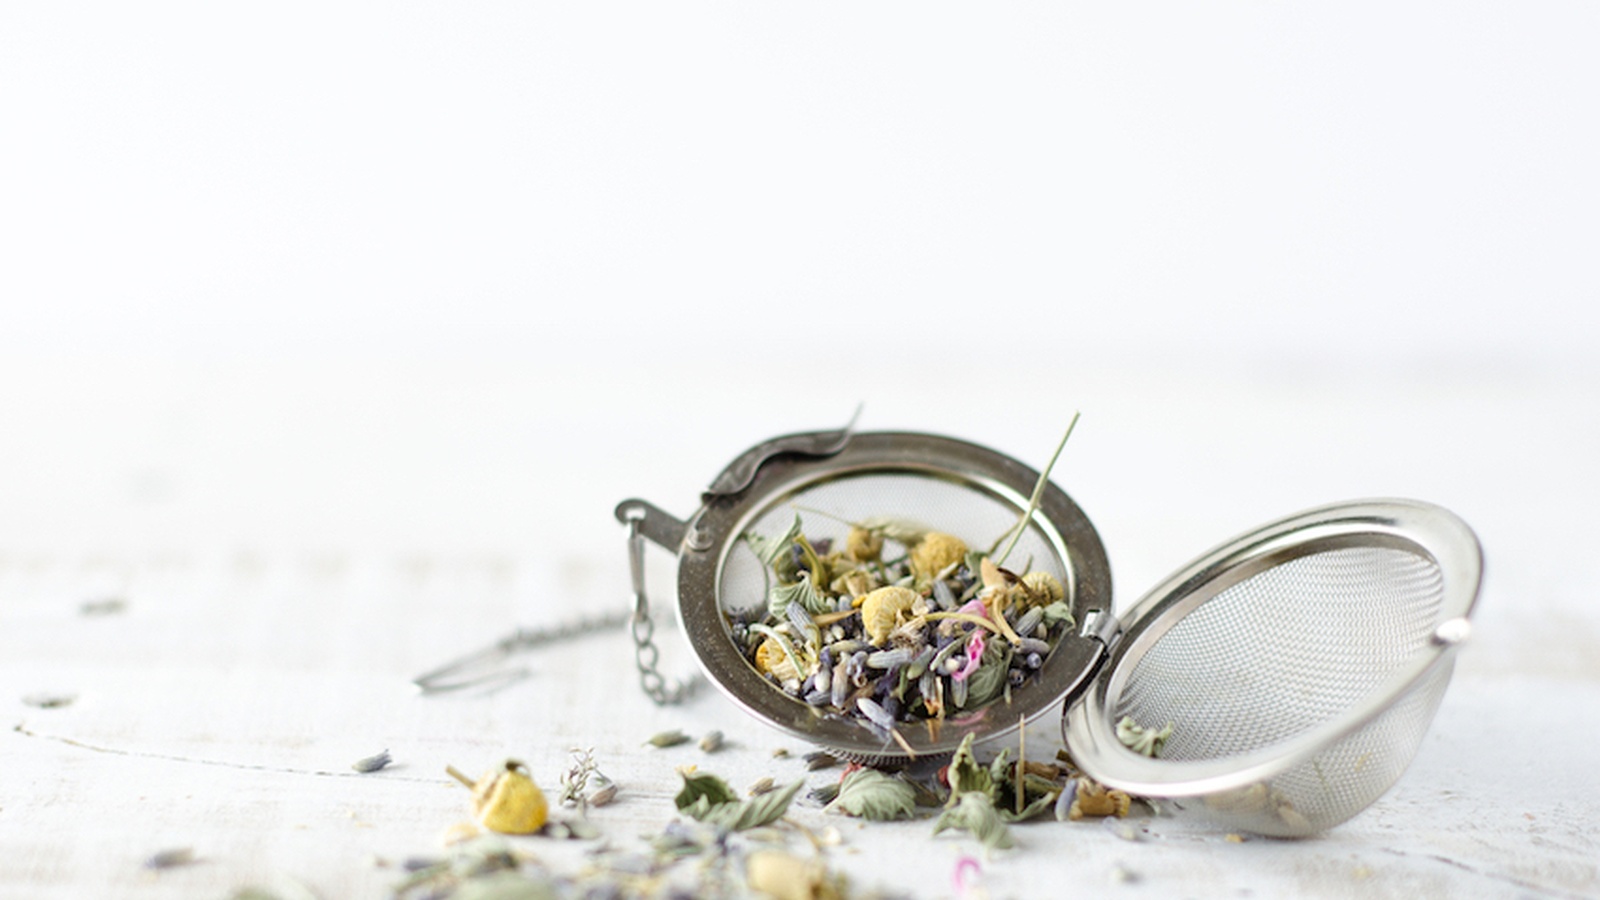 3 Herbal Tea Recipes Based on Your Skin Type